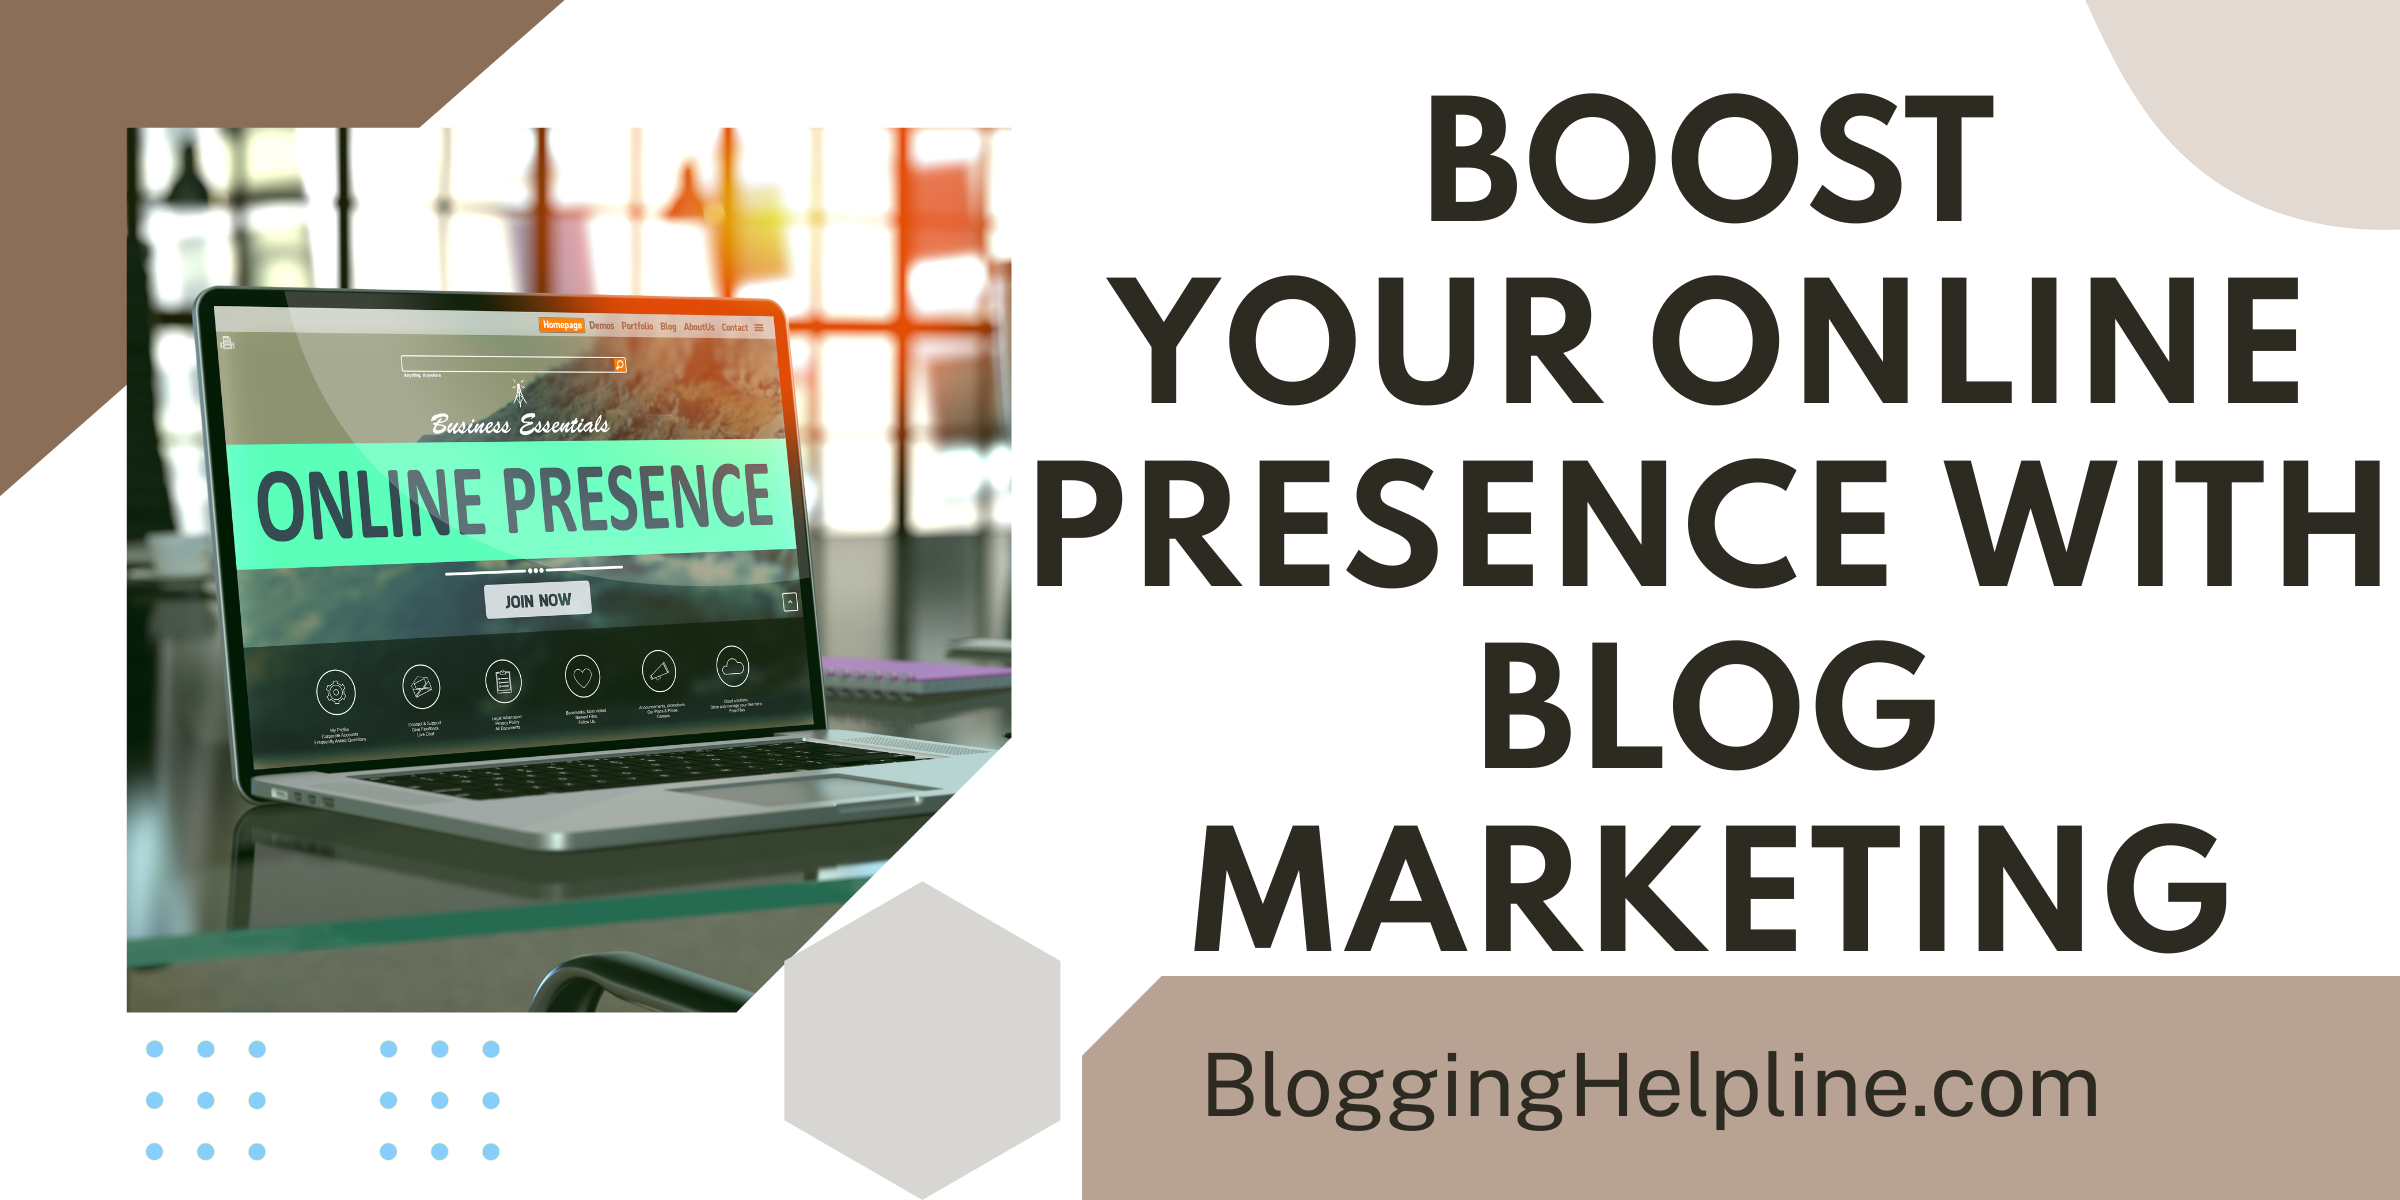 BOOST YOUR ONLINE PRESENCE WITH BLOG MARKETING